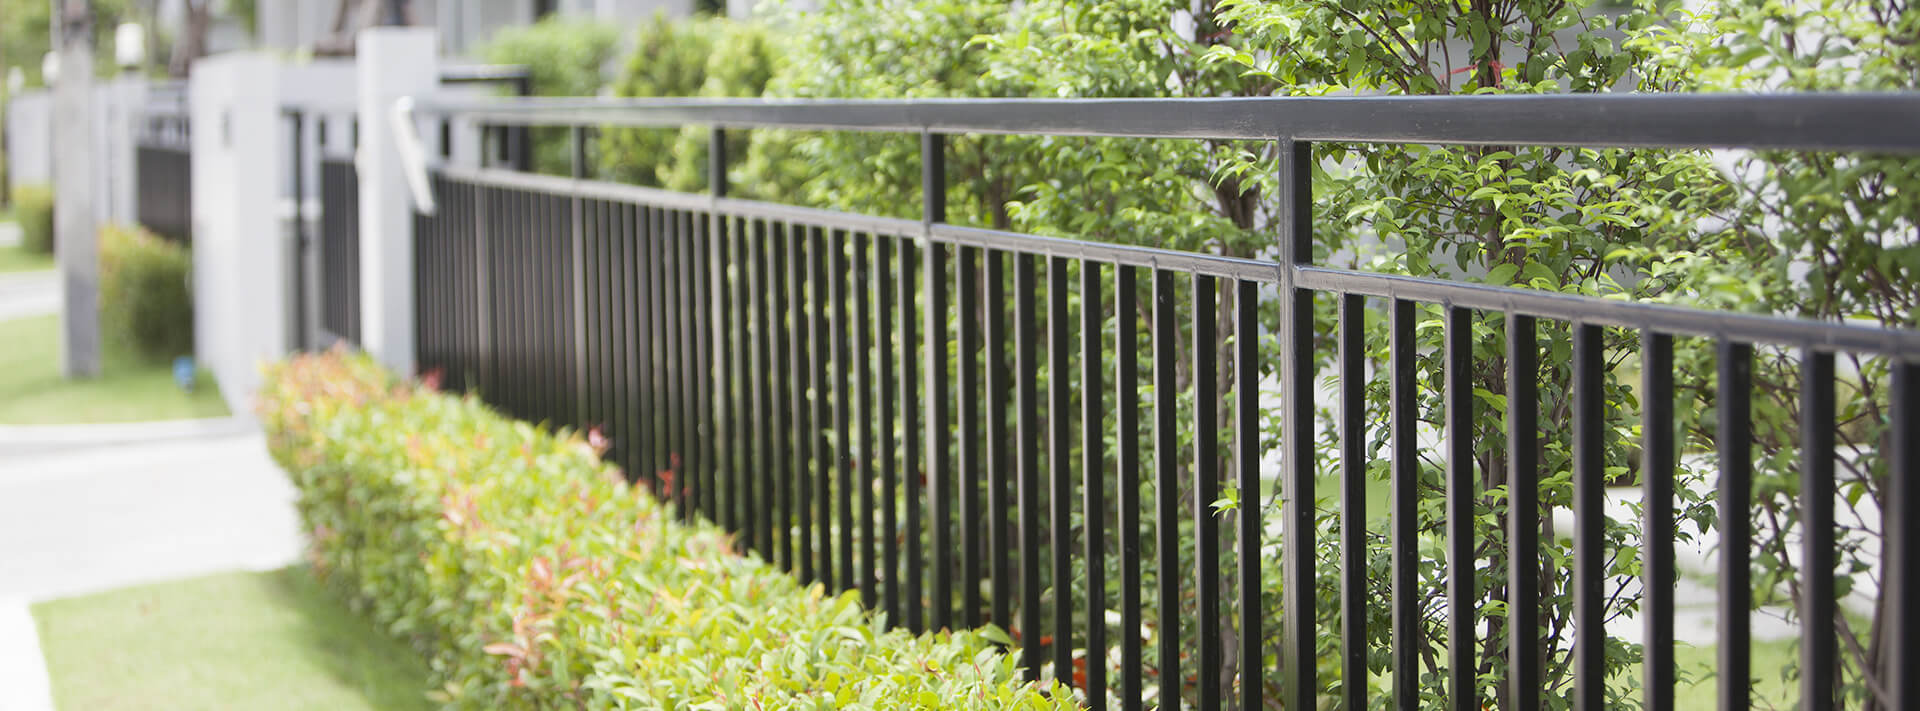 How to Find the Best Fence Companies